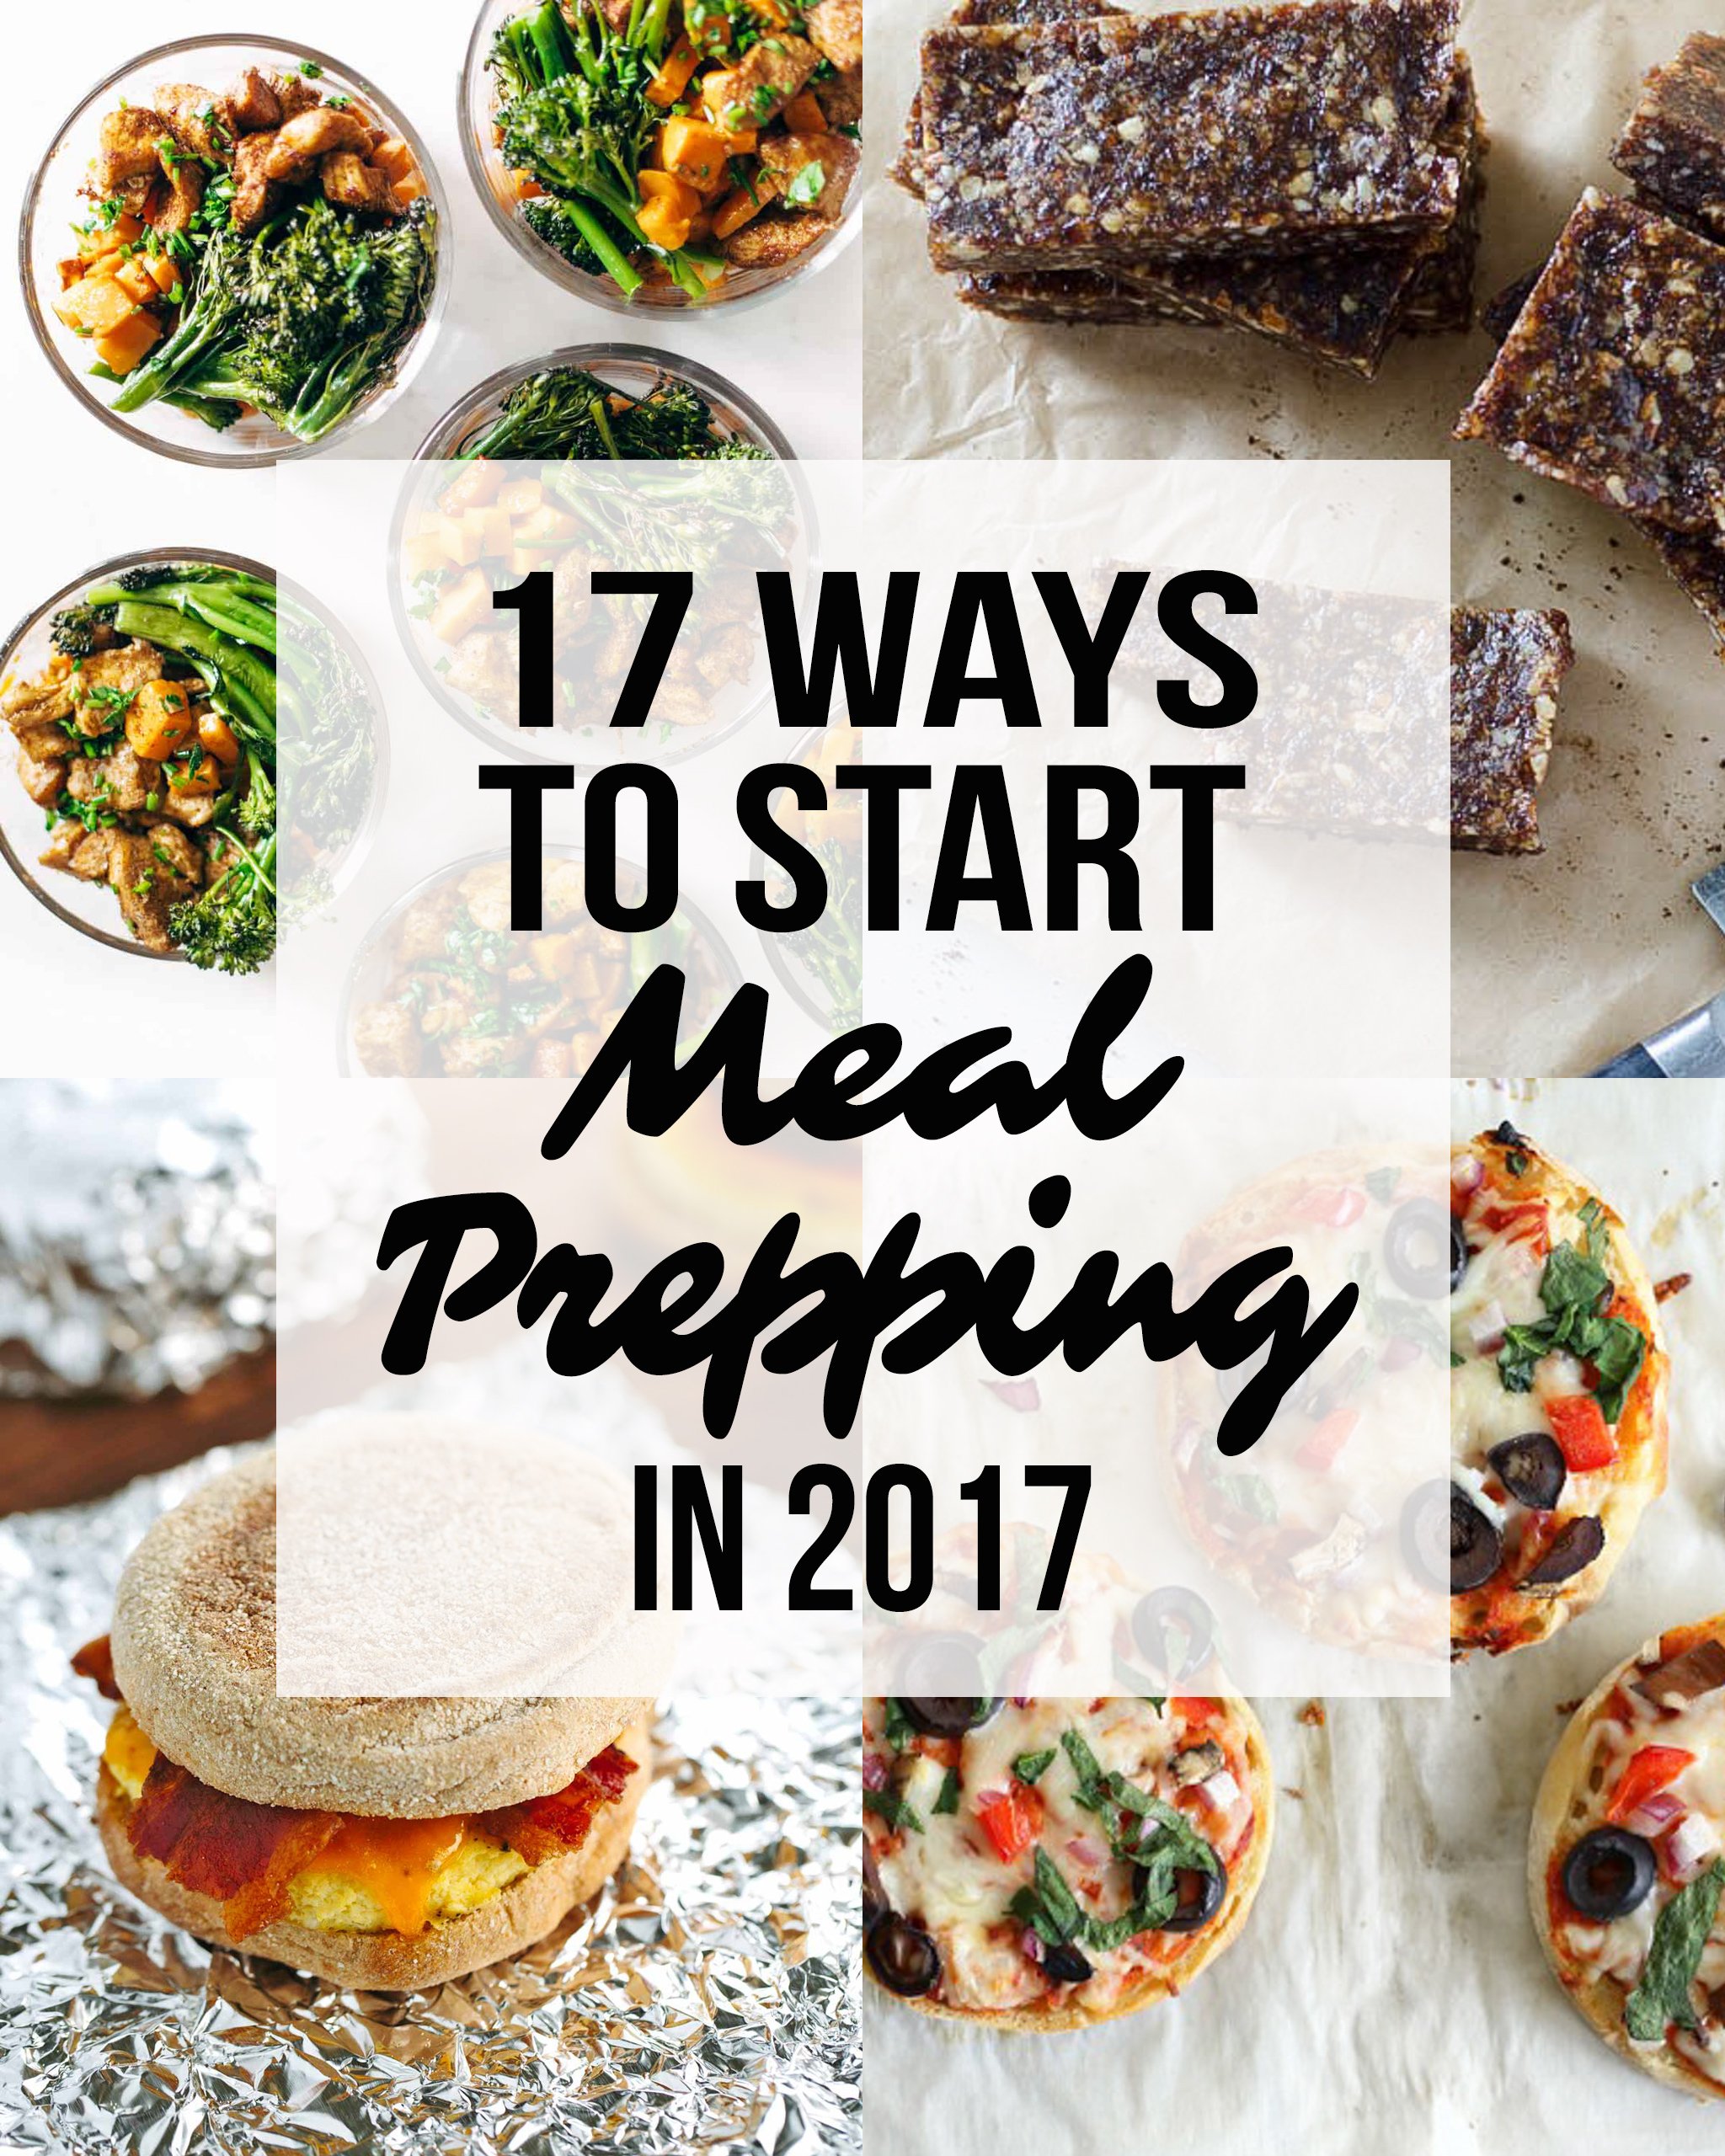 17 Ways to Start Meal Prepping in 2017 - Get your meal prep on in the new year with these ideas! - ProjectMealPlan.com